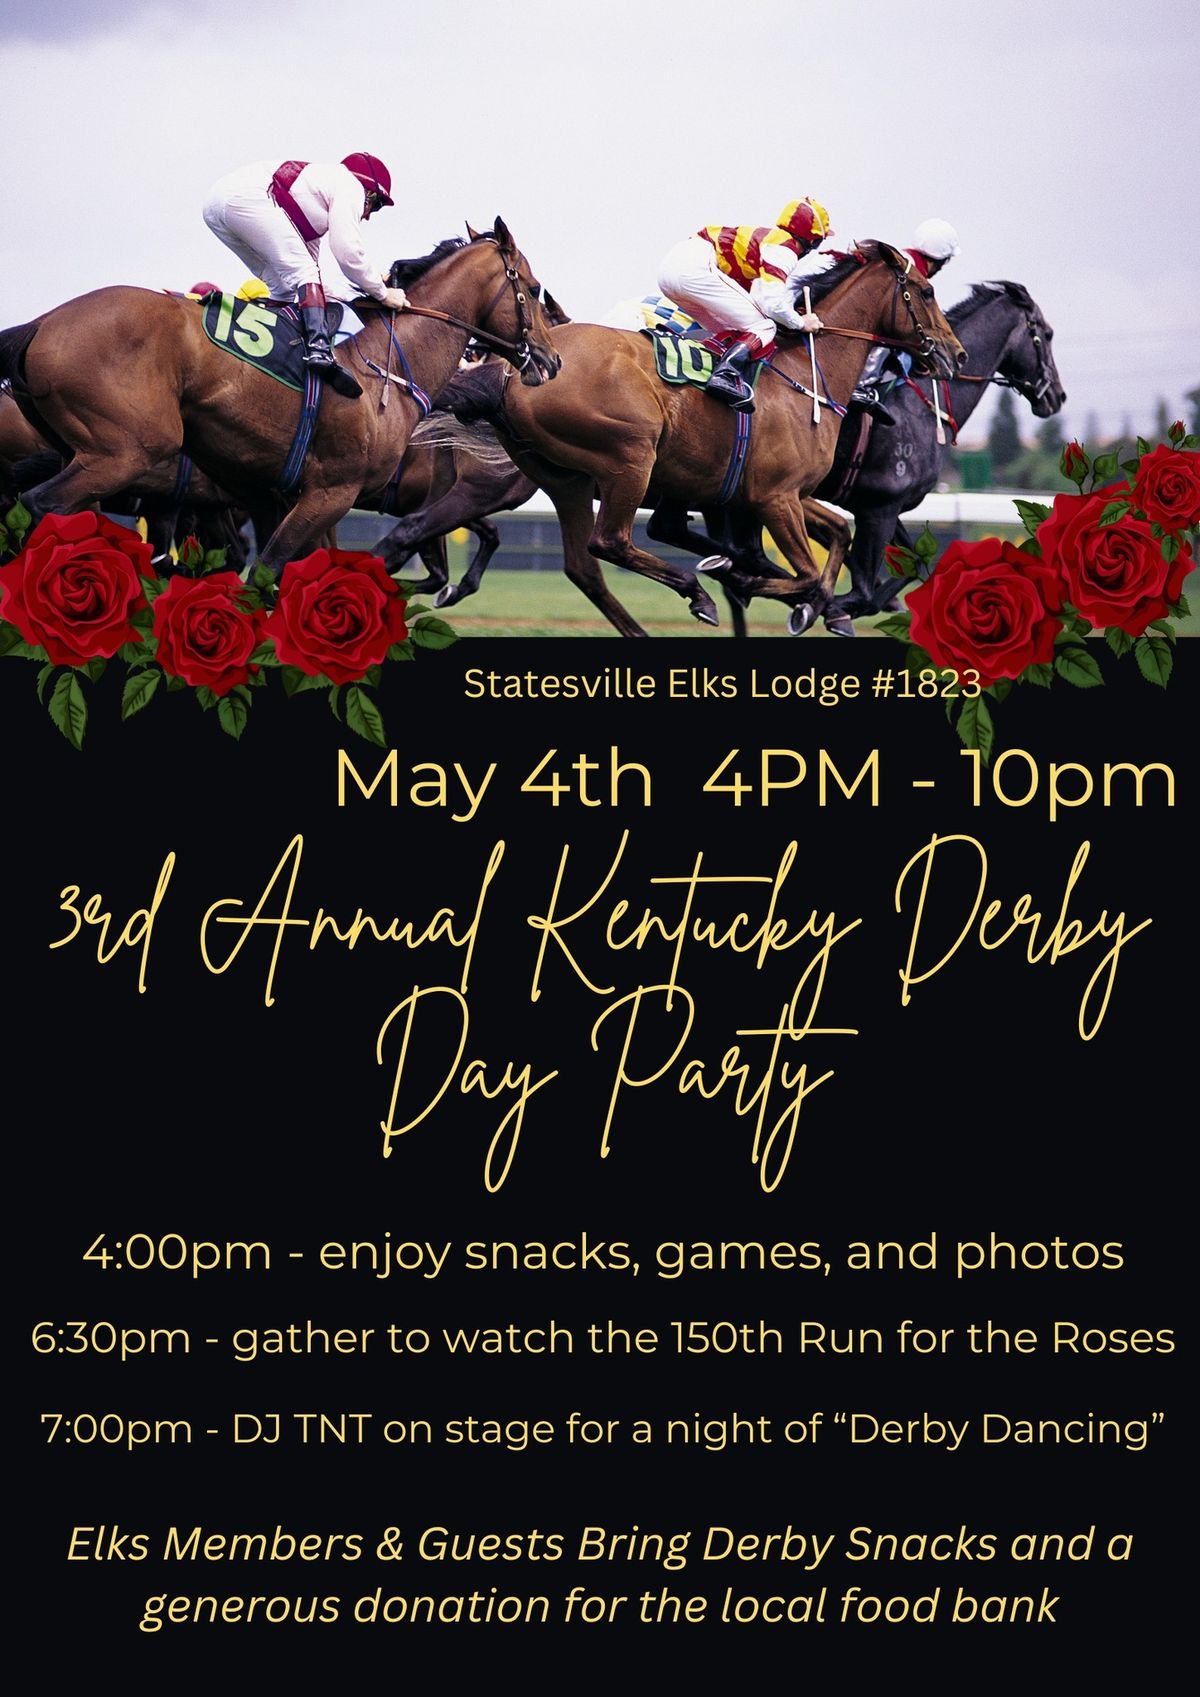 3rd Annual Kentucky Derby Party